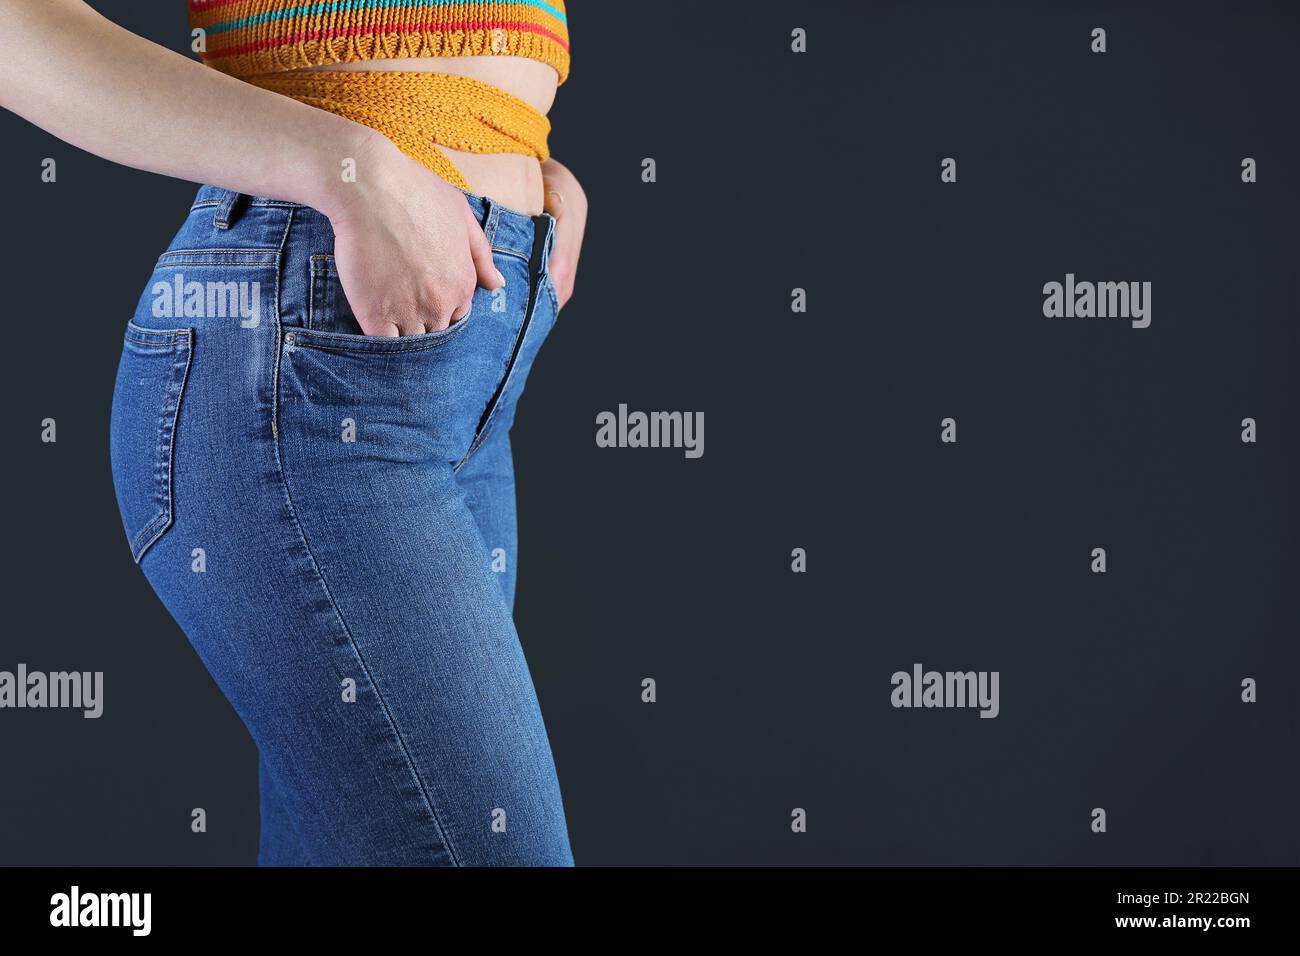 Slim Young Woman Oversize Jeans Posing Stock Photo 1507926773